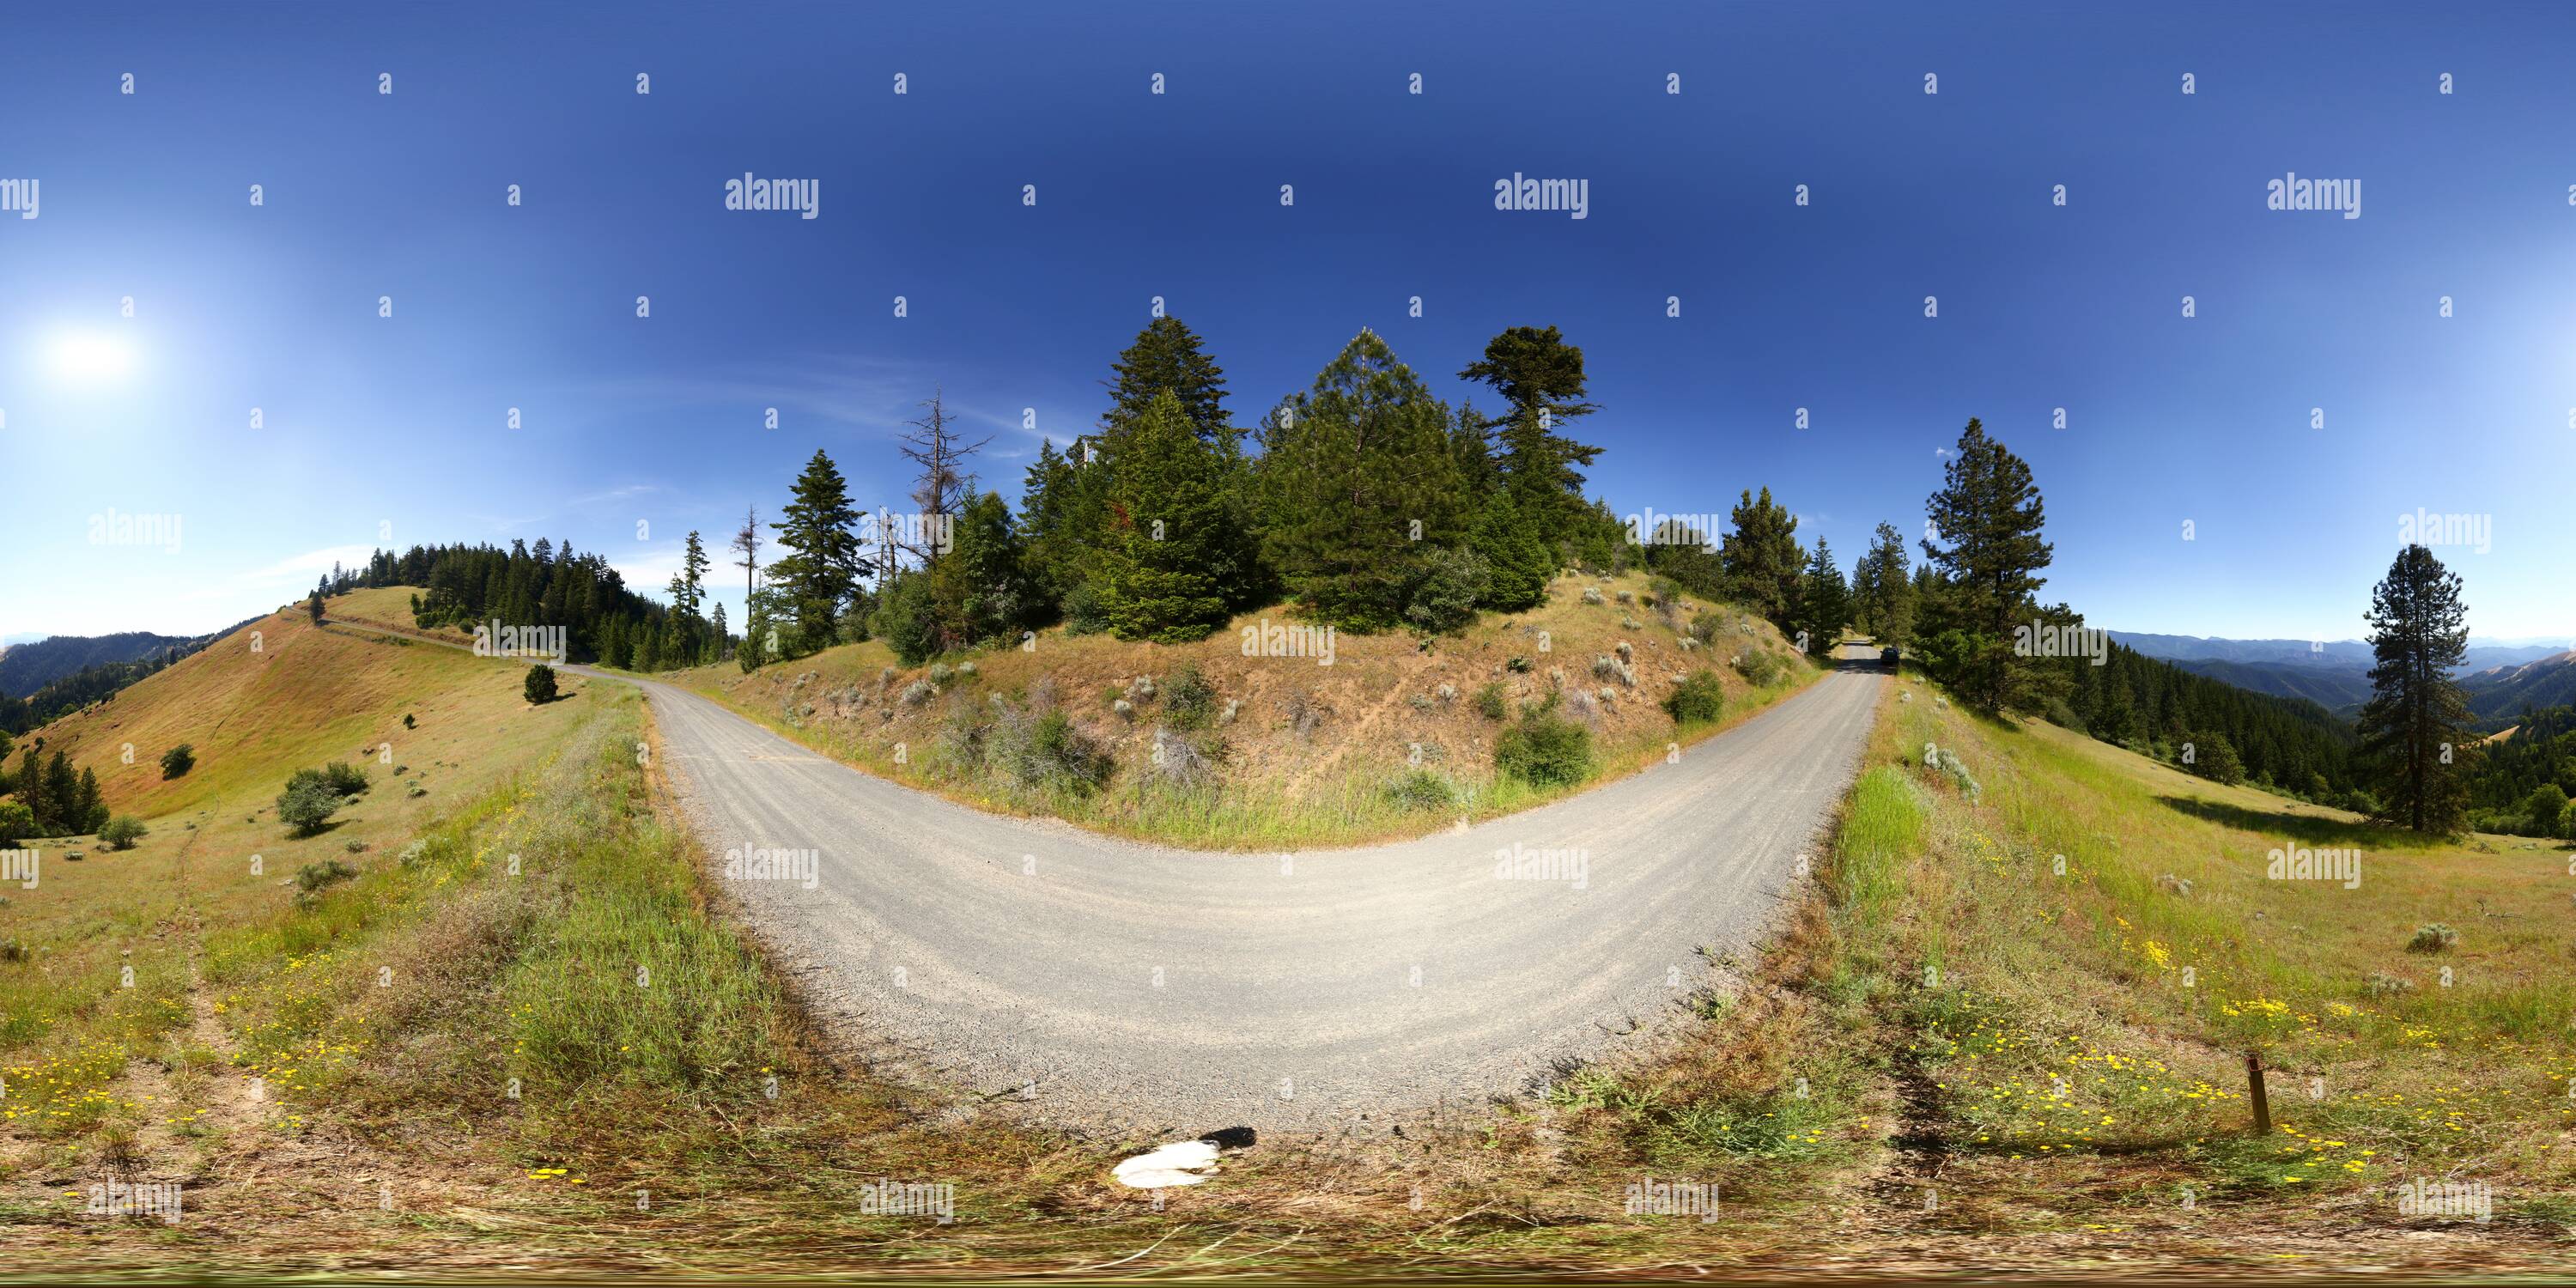 360 degree panoramic view of Anderson Butte Road